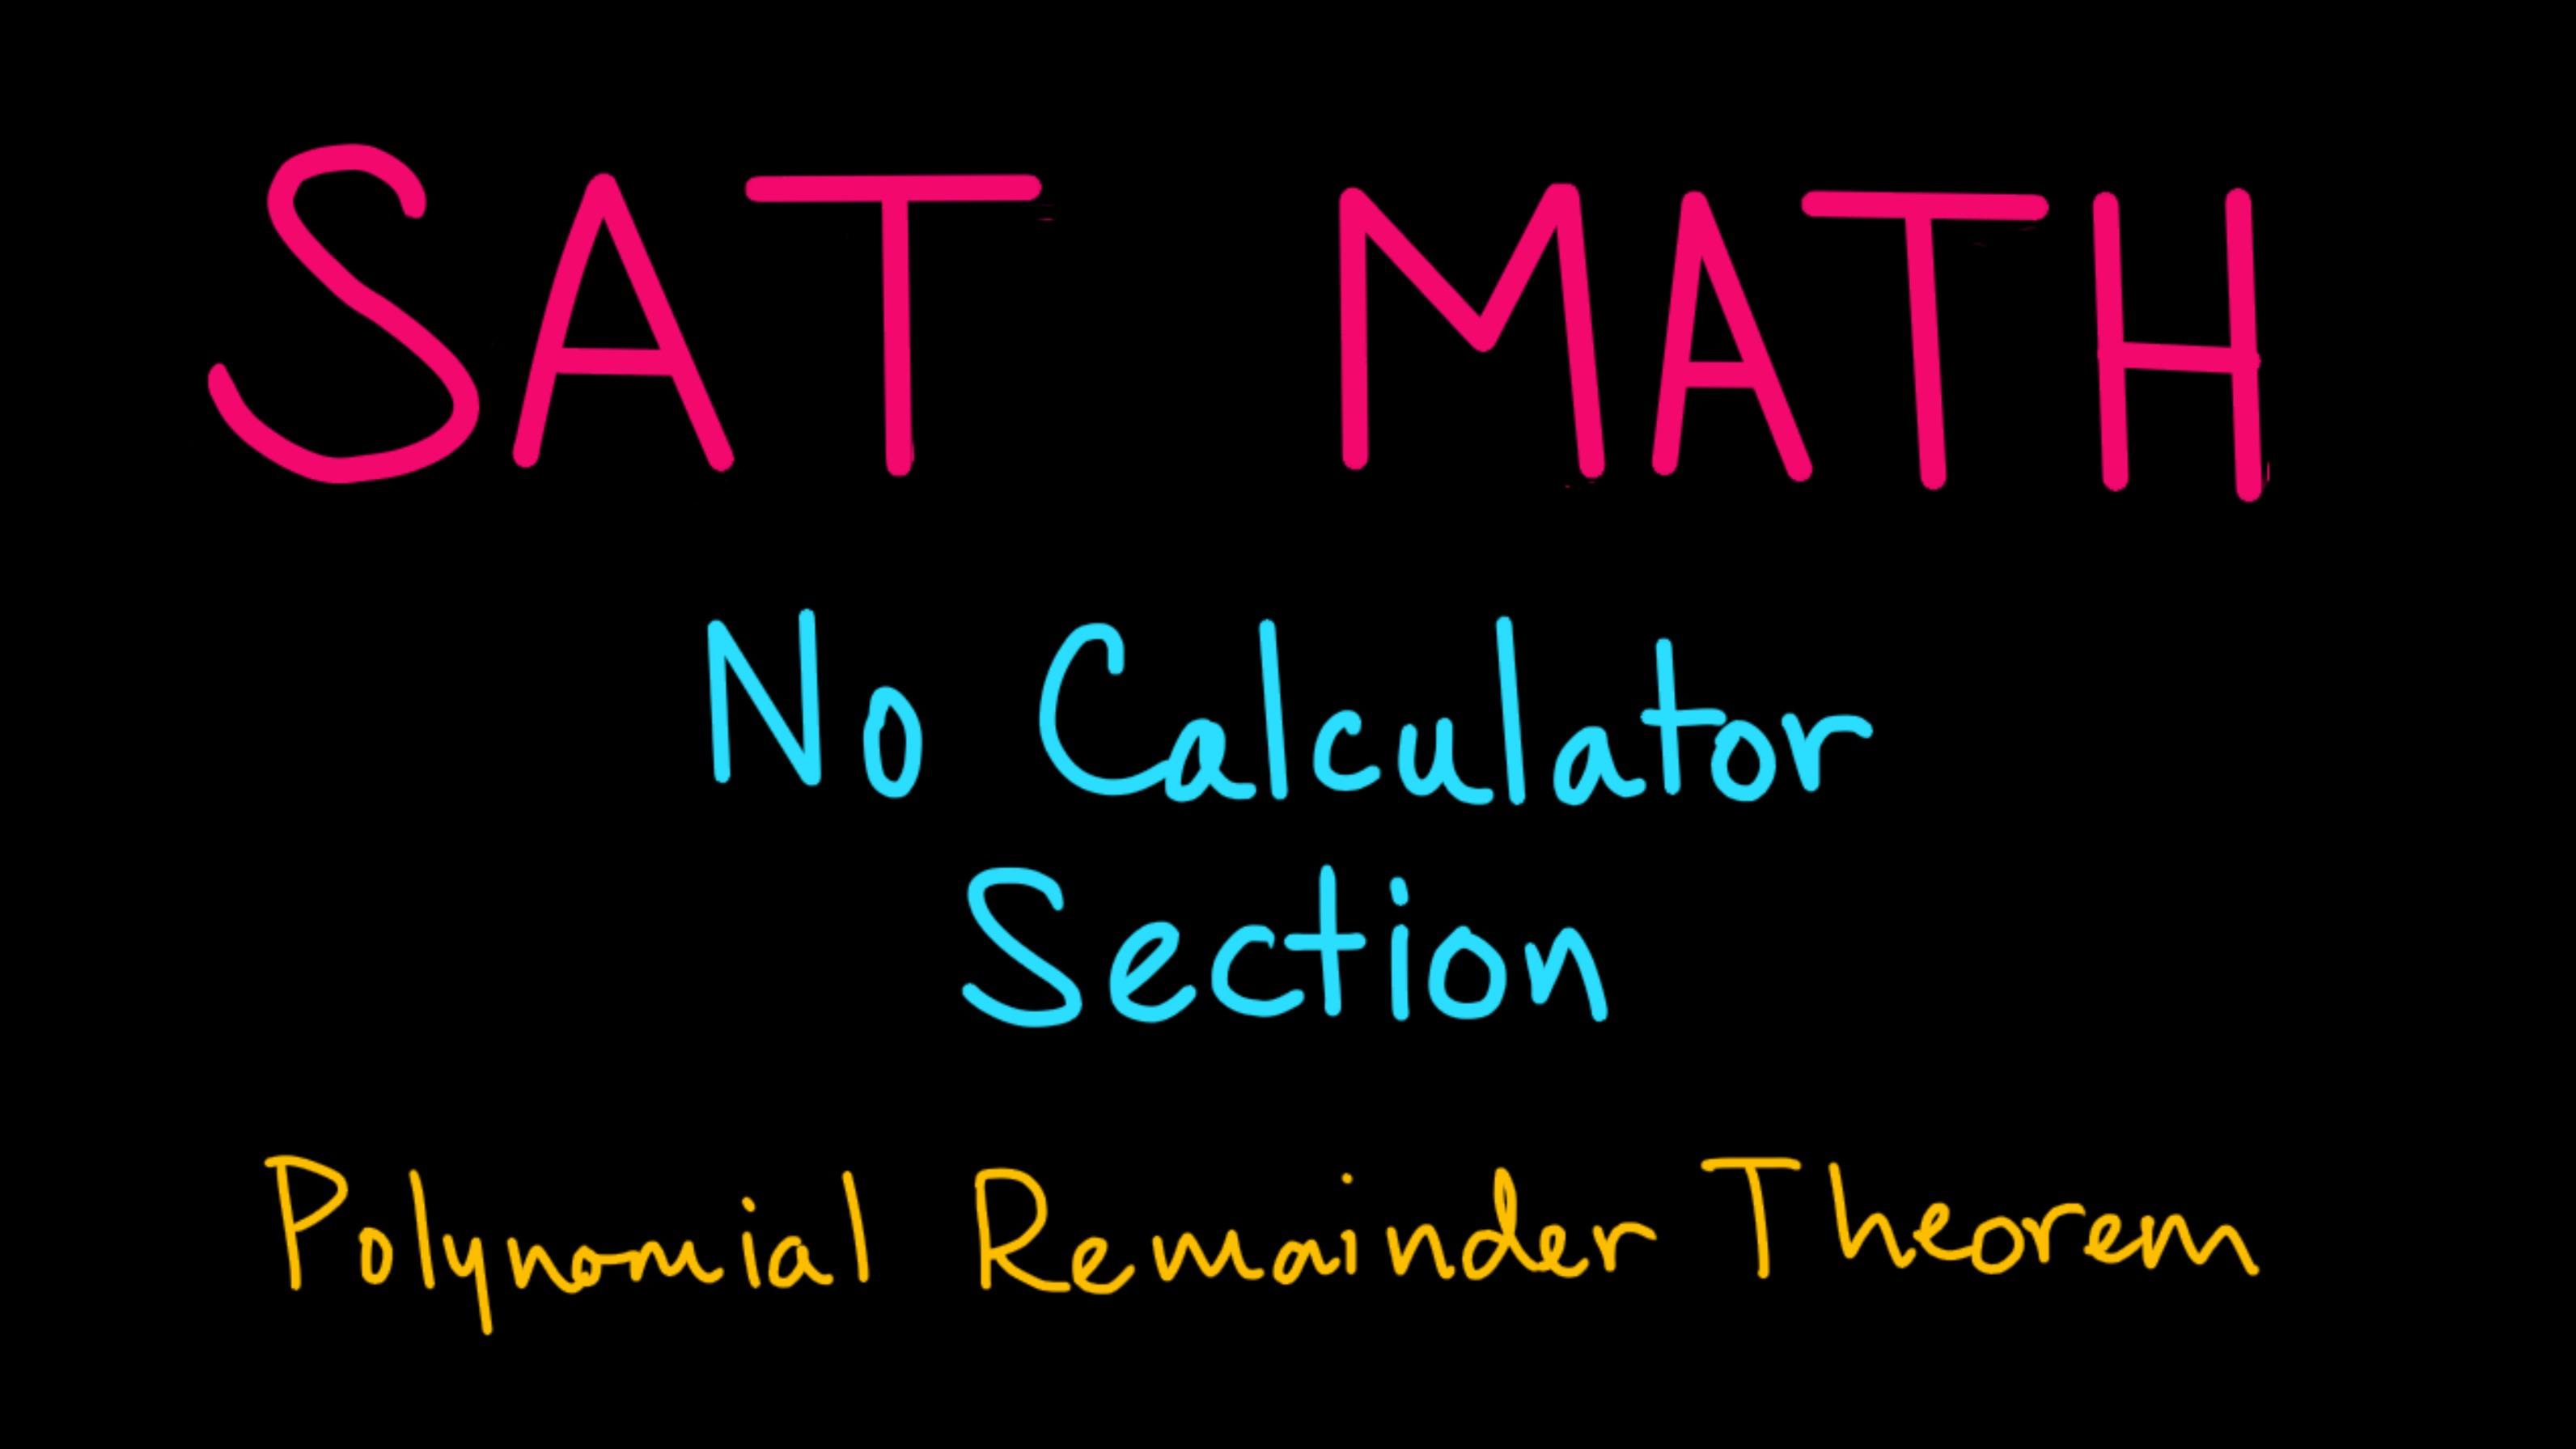 SAT Math: When to use the Polynomial Remainder Theorem